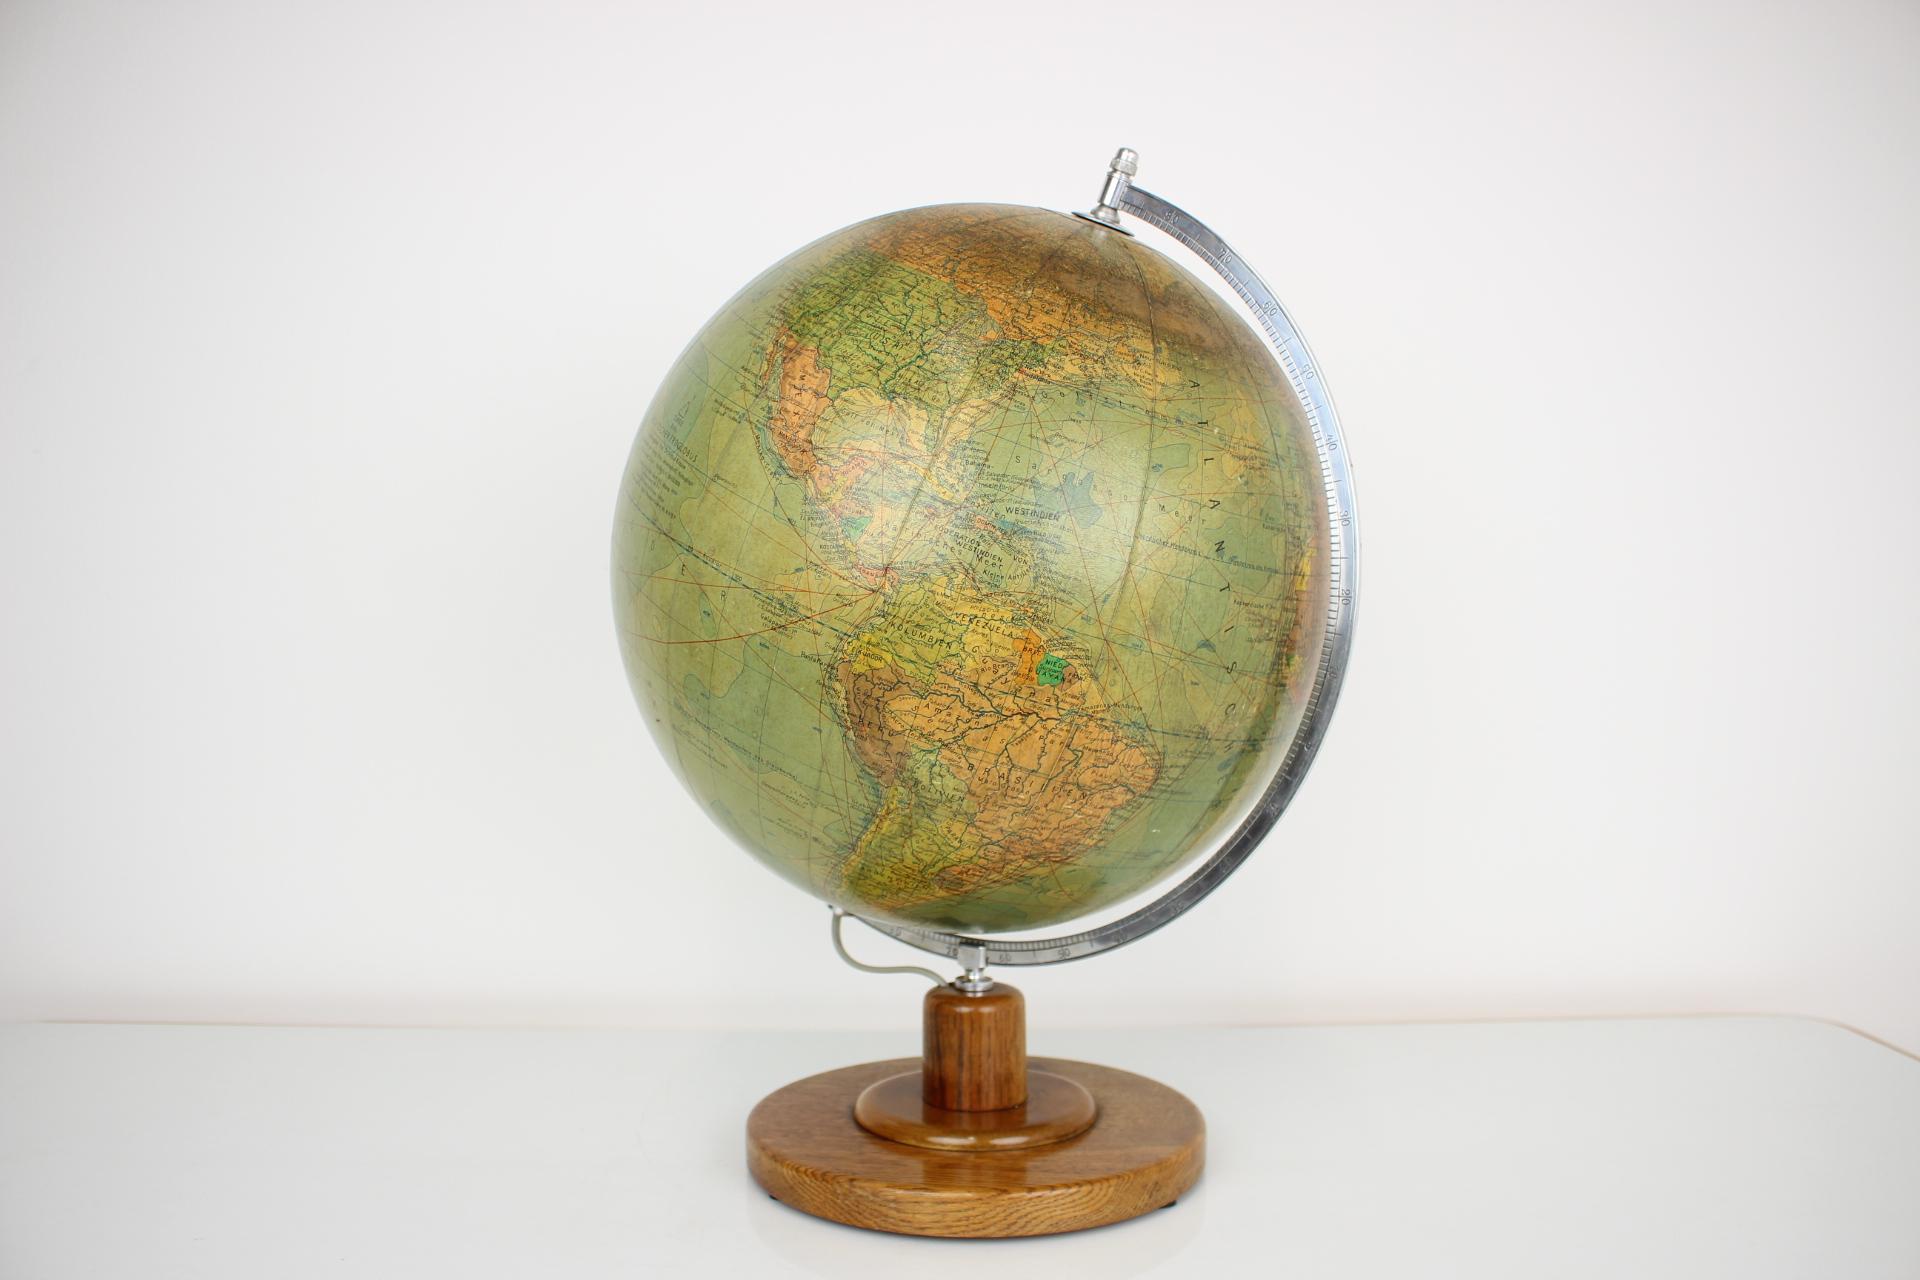 German Mid-Century Light Glass Globe with Wooden Base by Paul Rath, 1950s For Sale